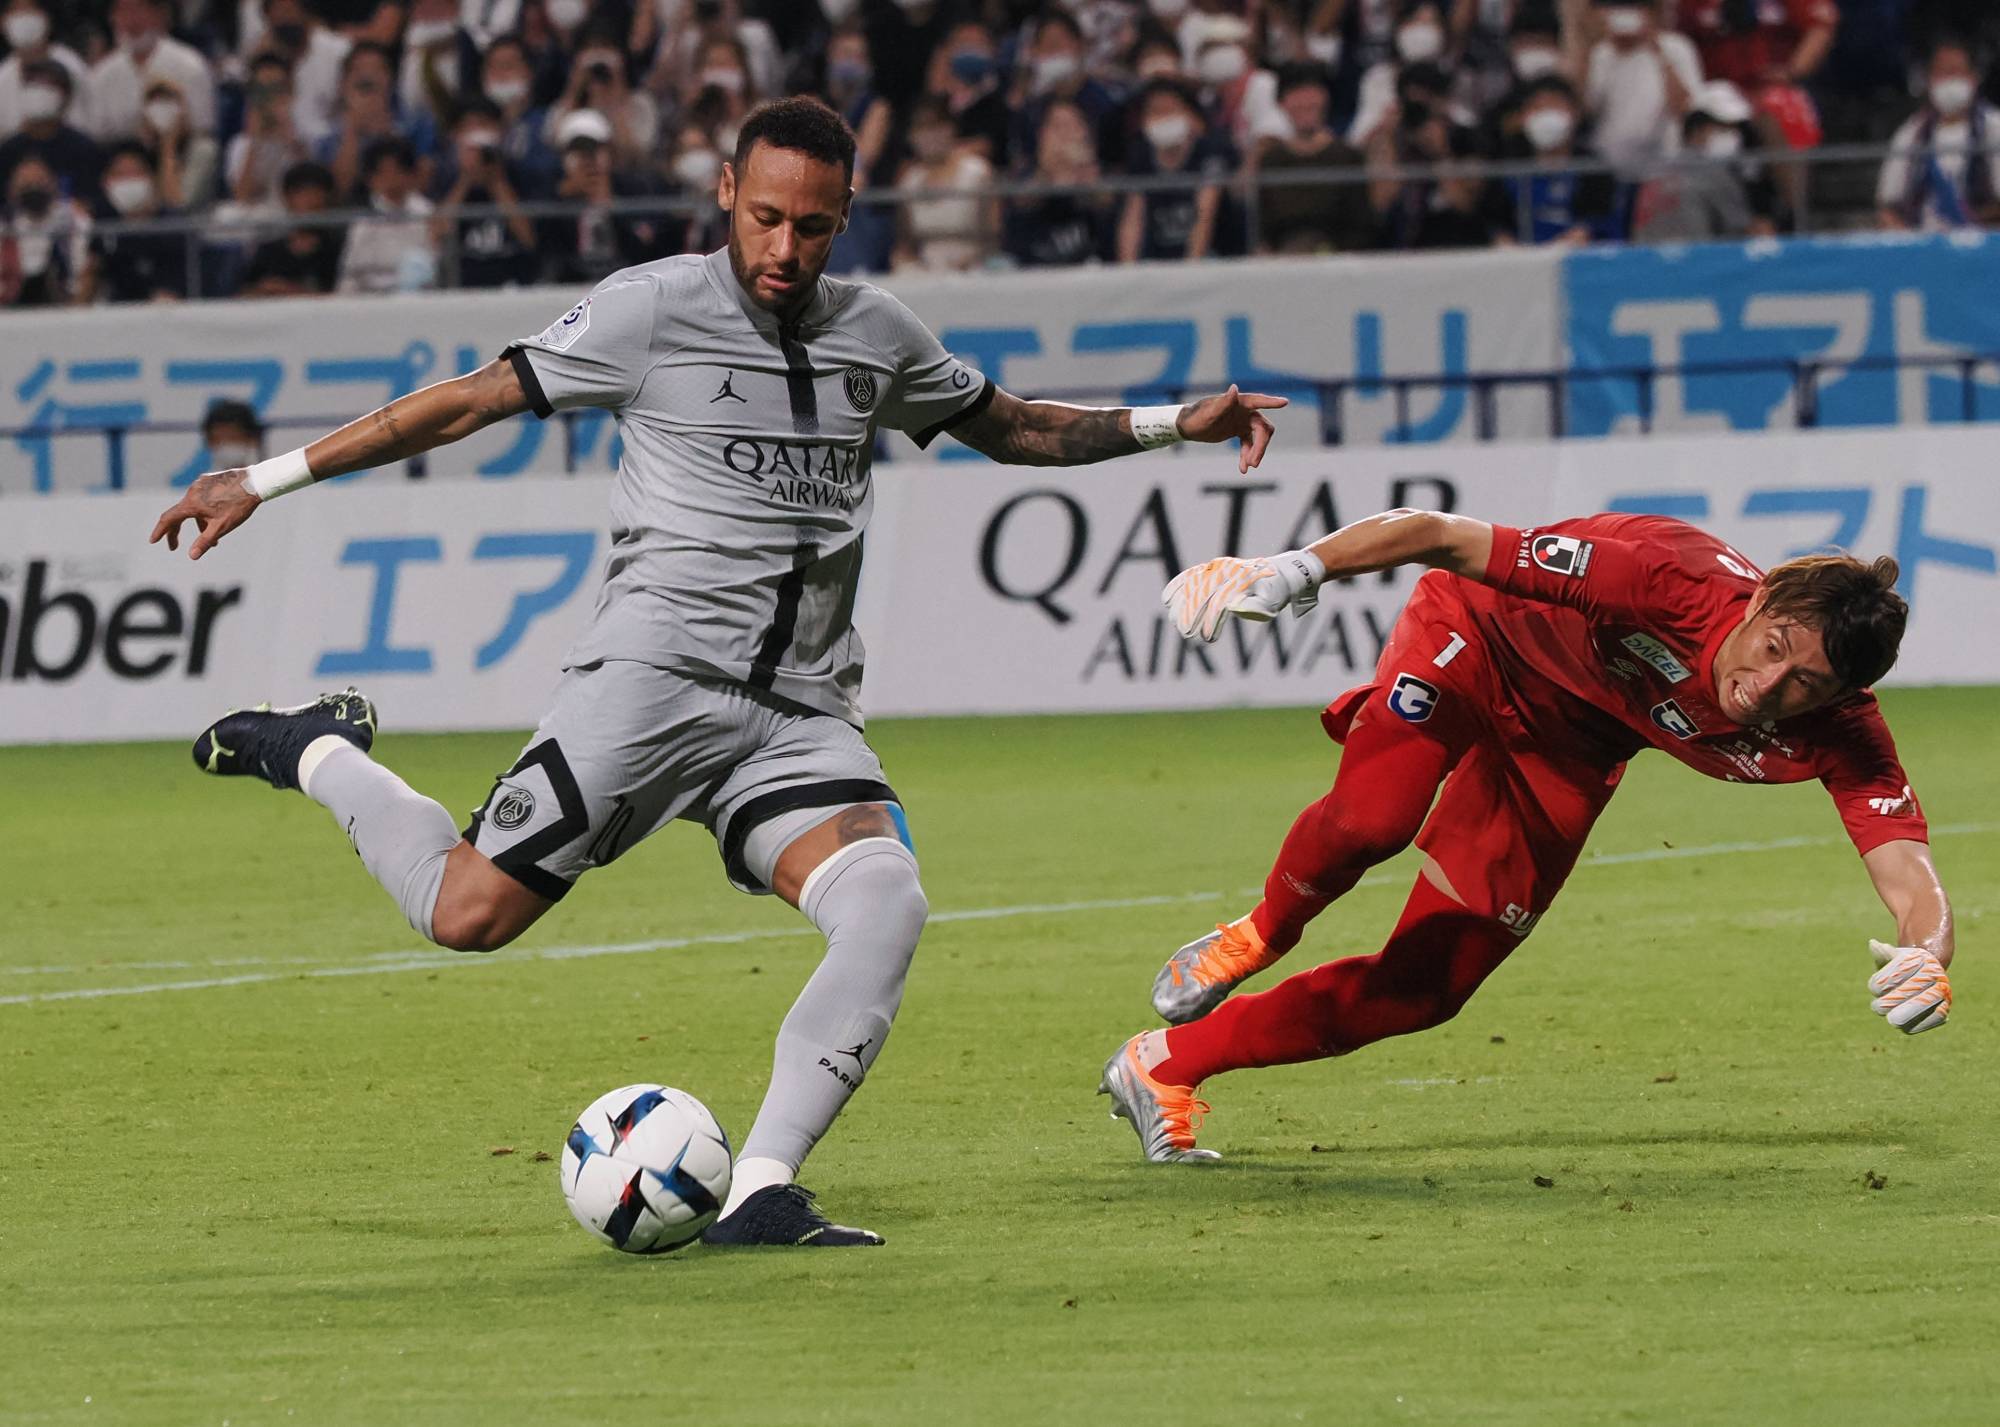 PSG hits six past Gamba Osaka to complete Japan tour in style - The ...